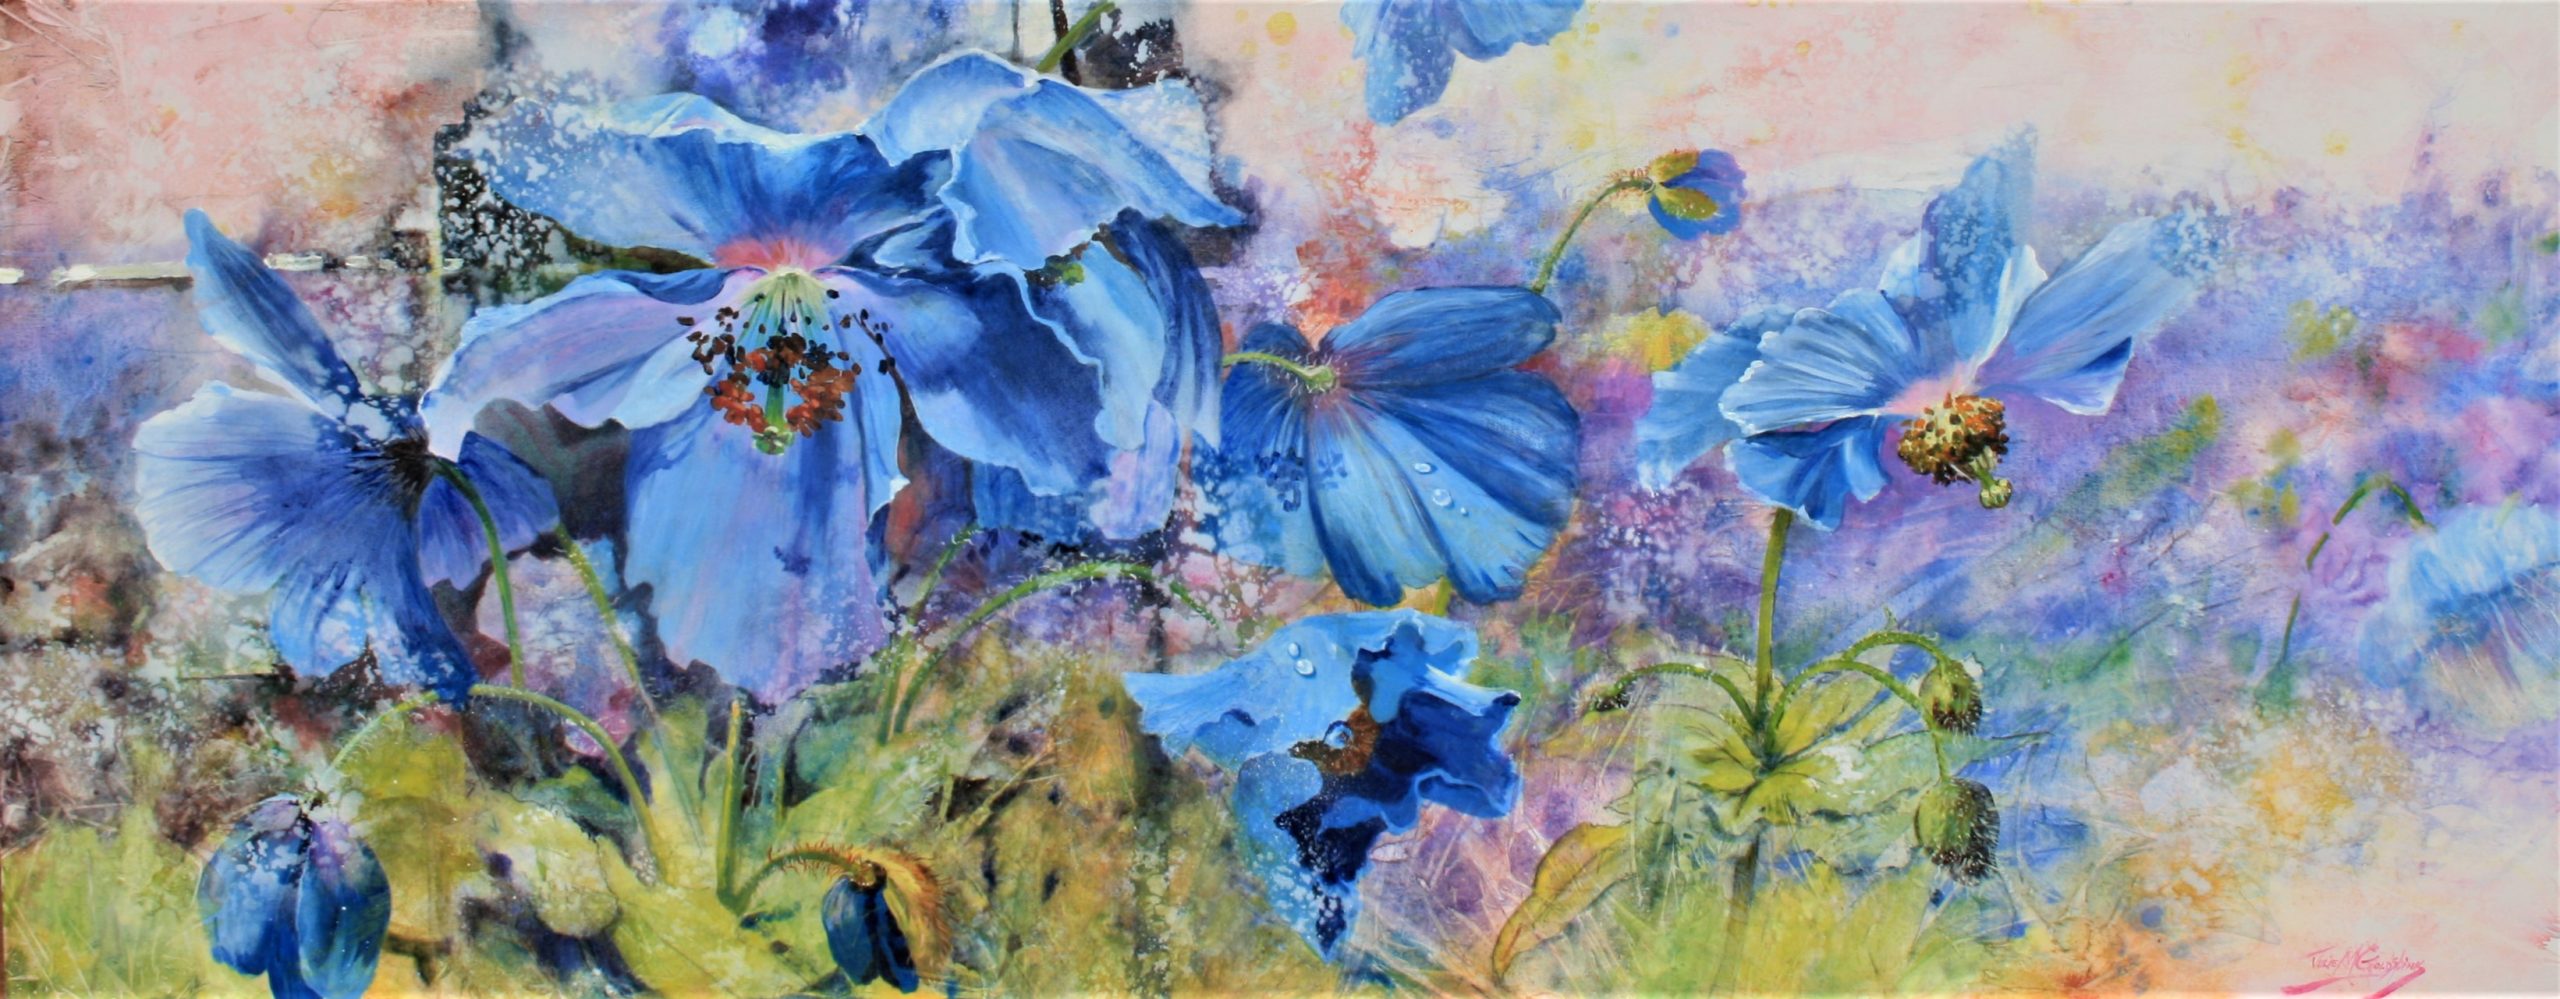 Himalayan Blues WC AND ACRYLIC on Canvas 60 cm x 1.5 cm